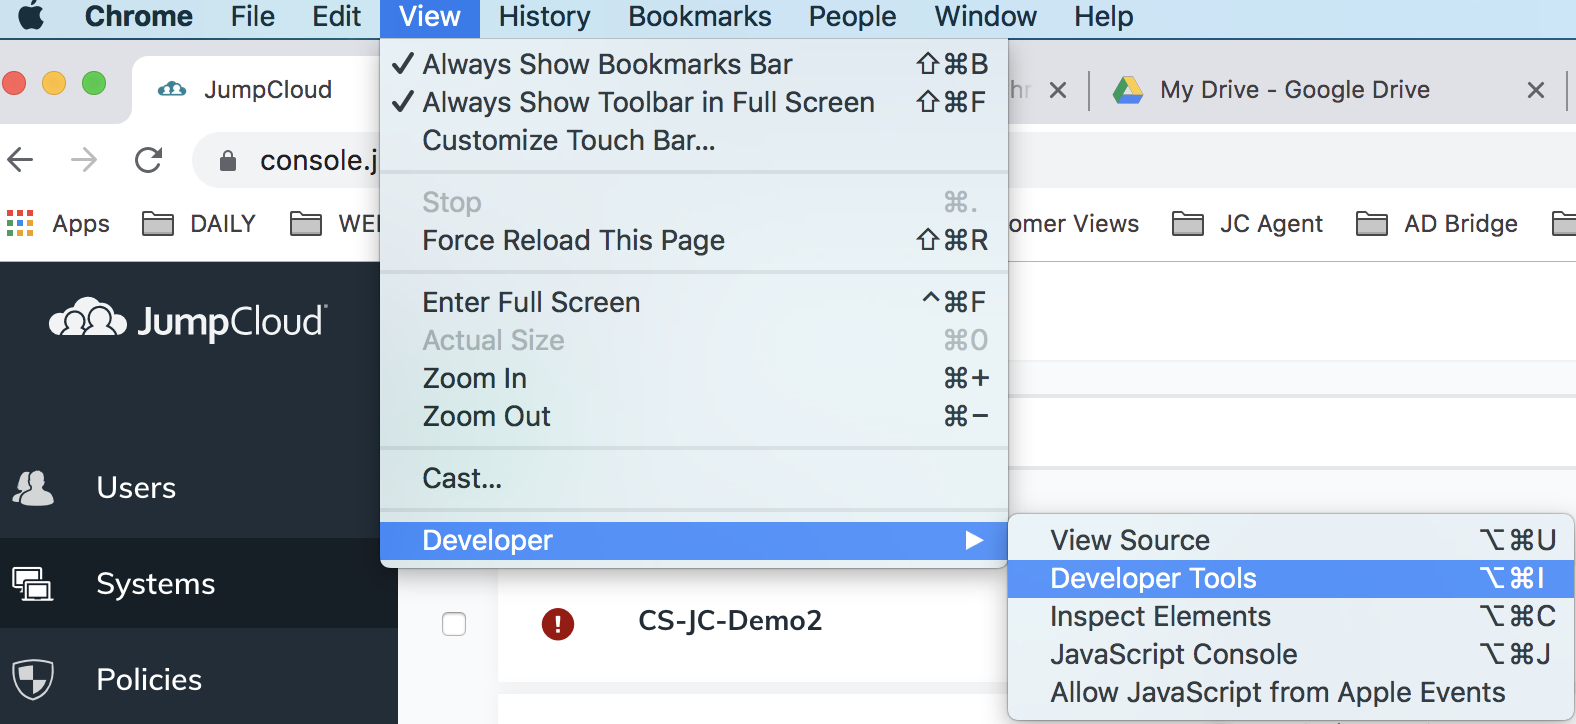 View, add, edit, and delete cookies, DevTools